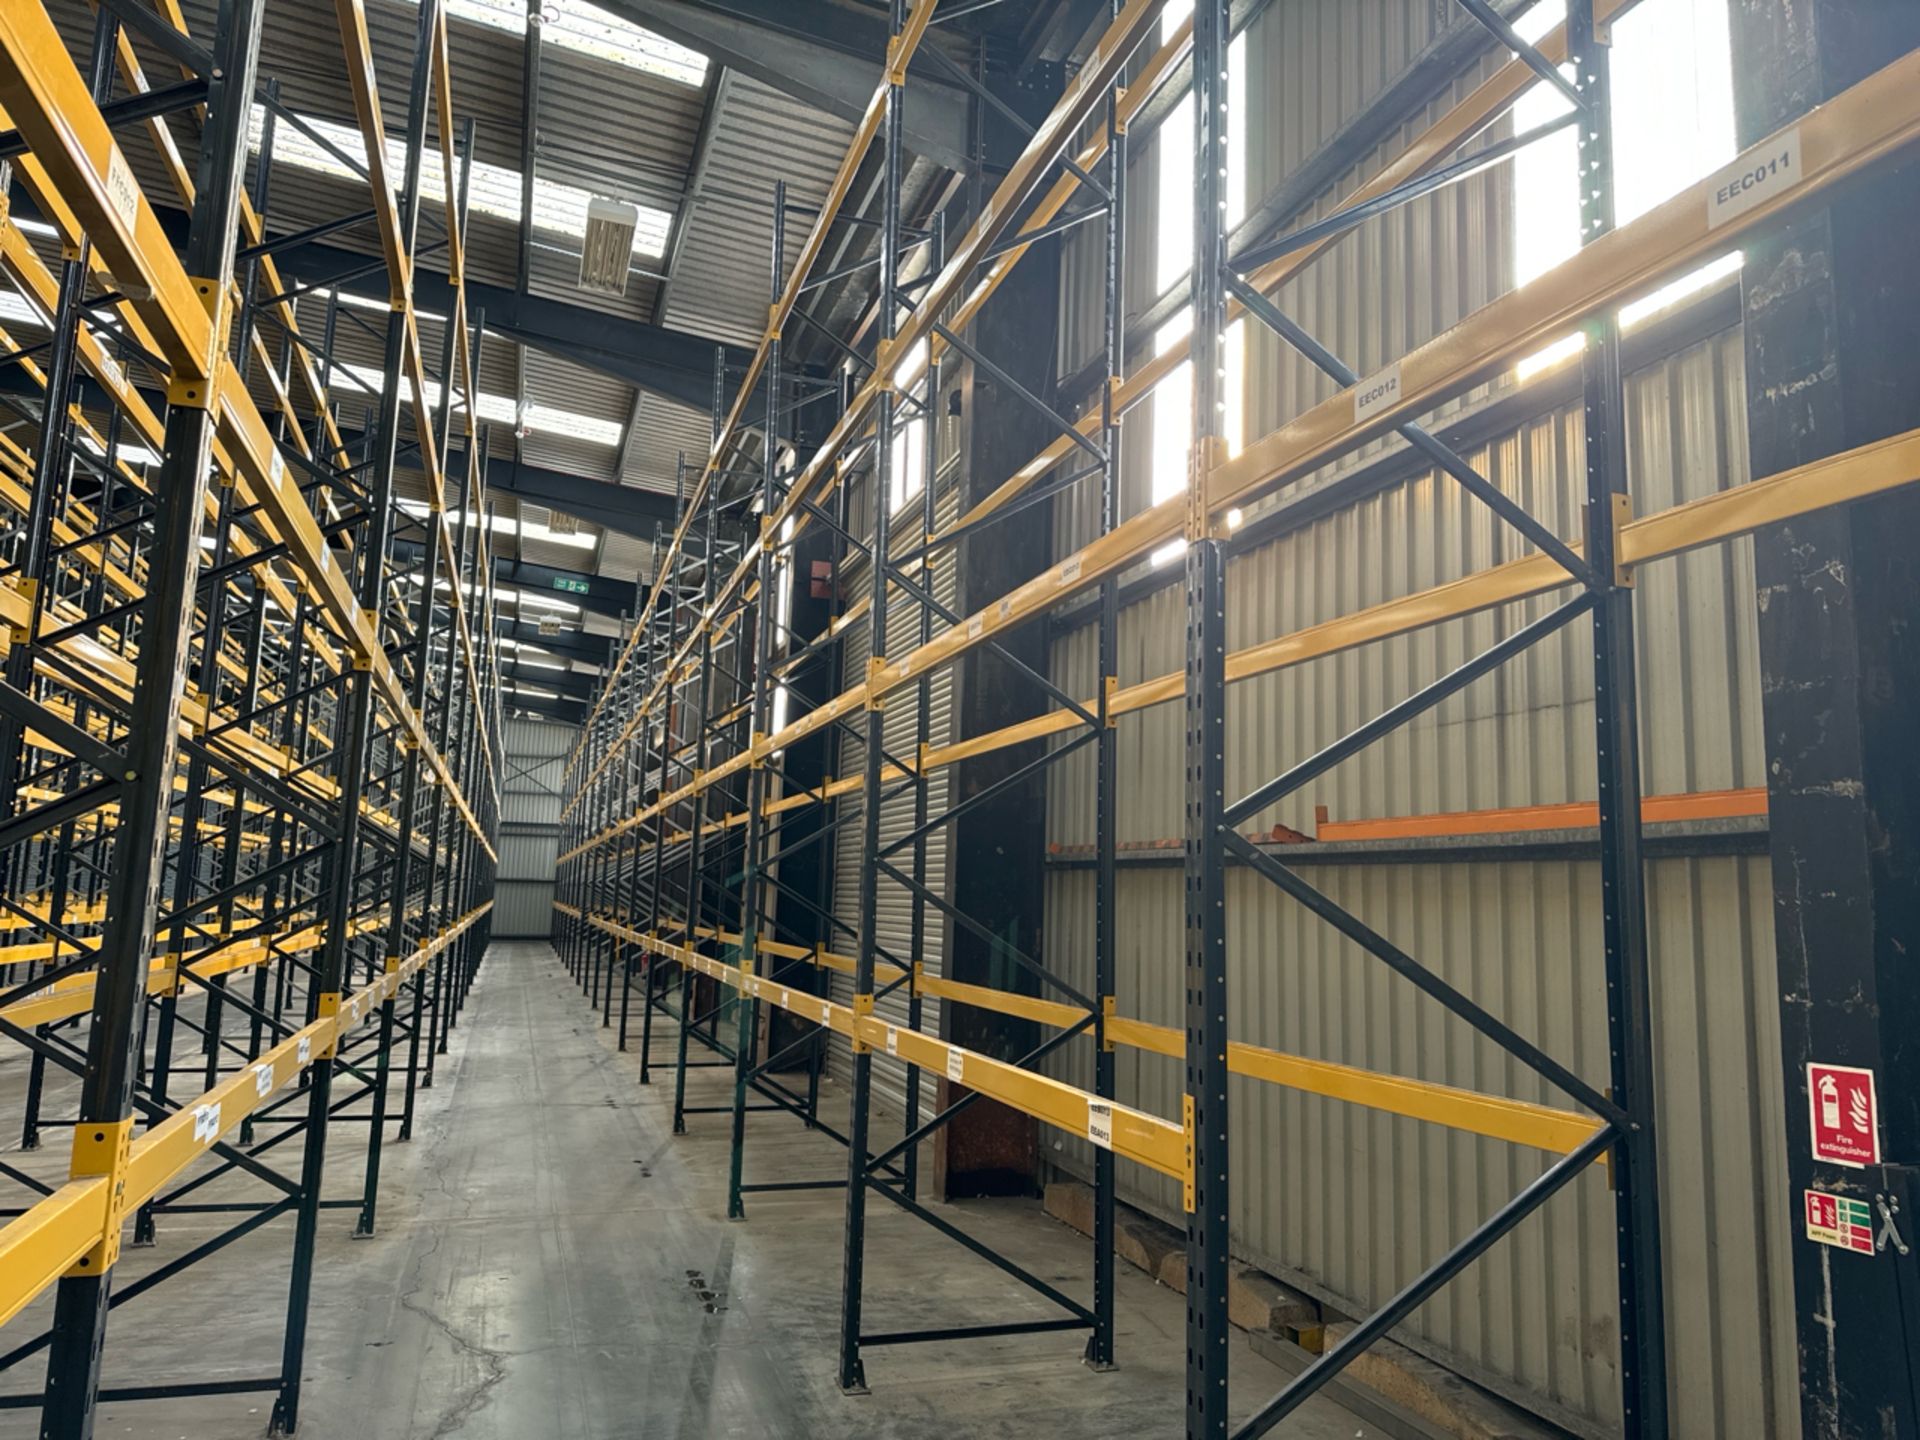 20 Bays Of Boltless Industrial Pallet Racking - Image 7 of 8